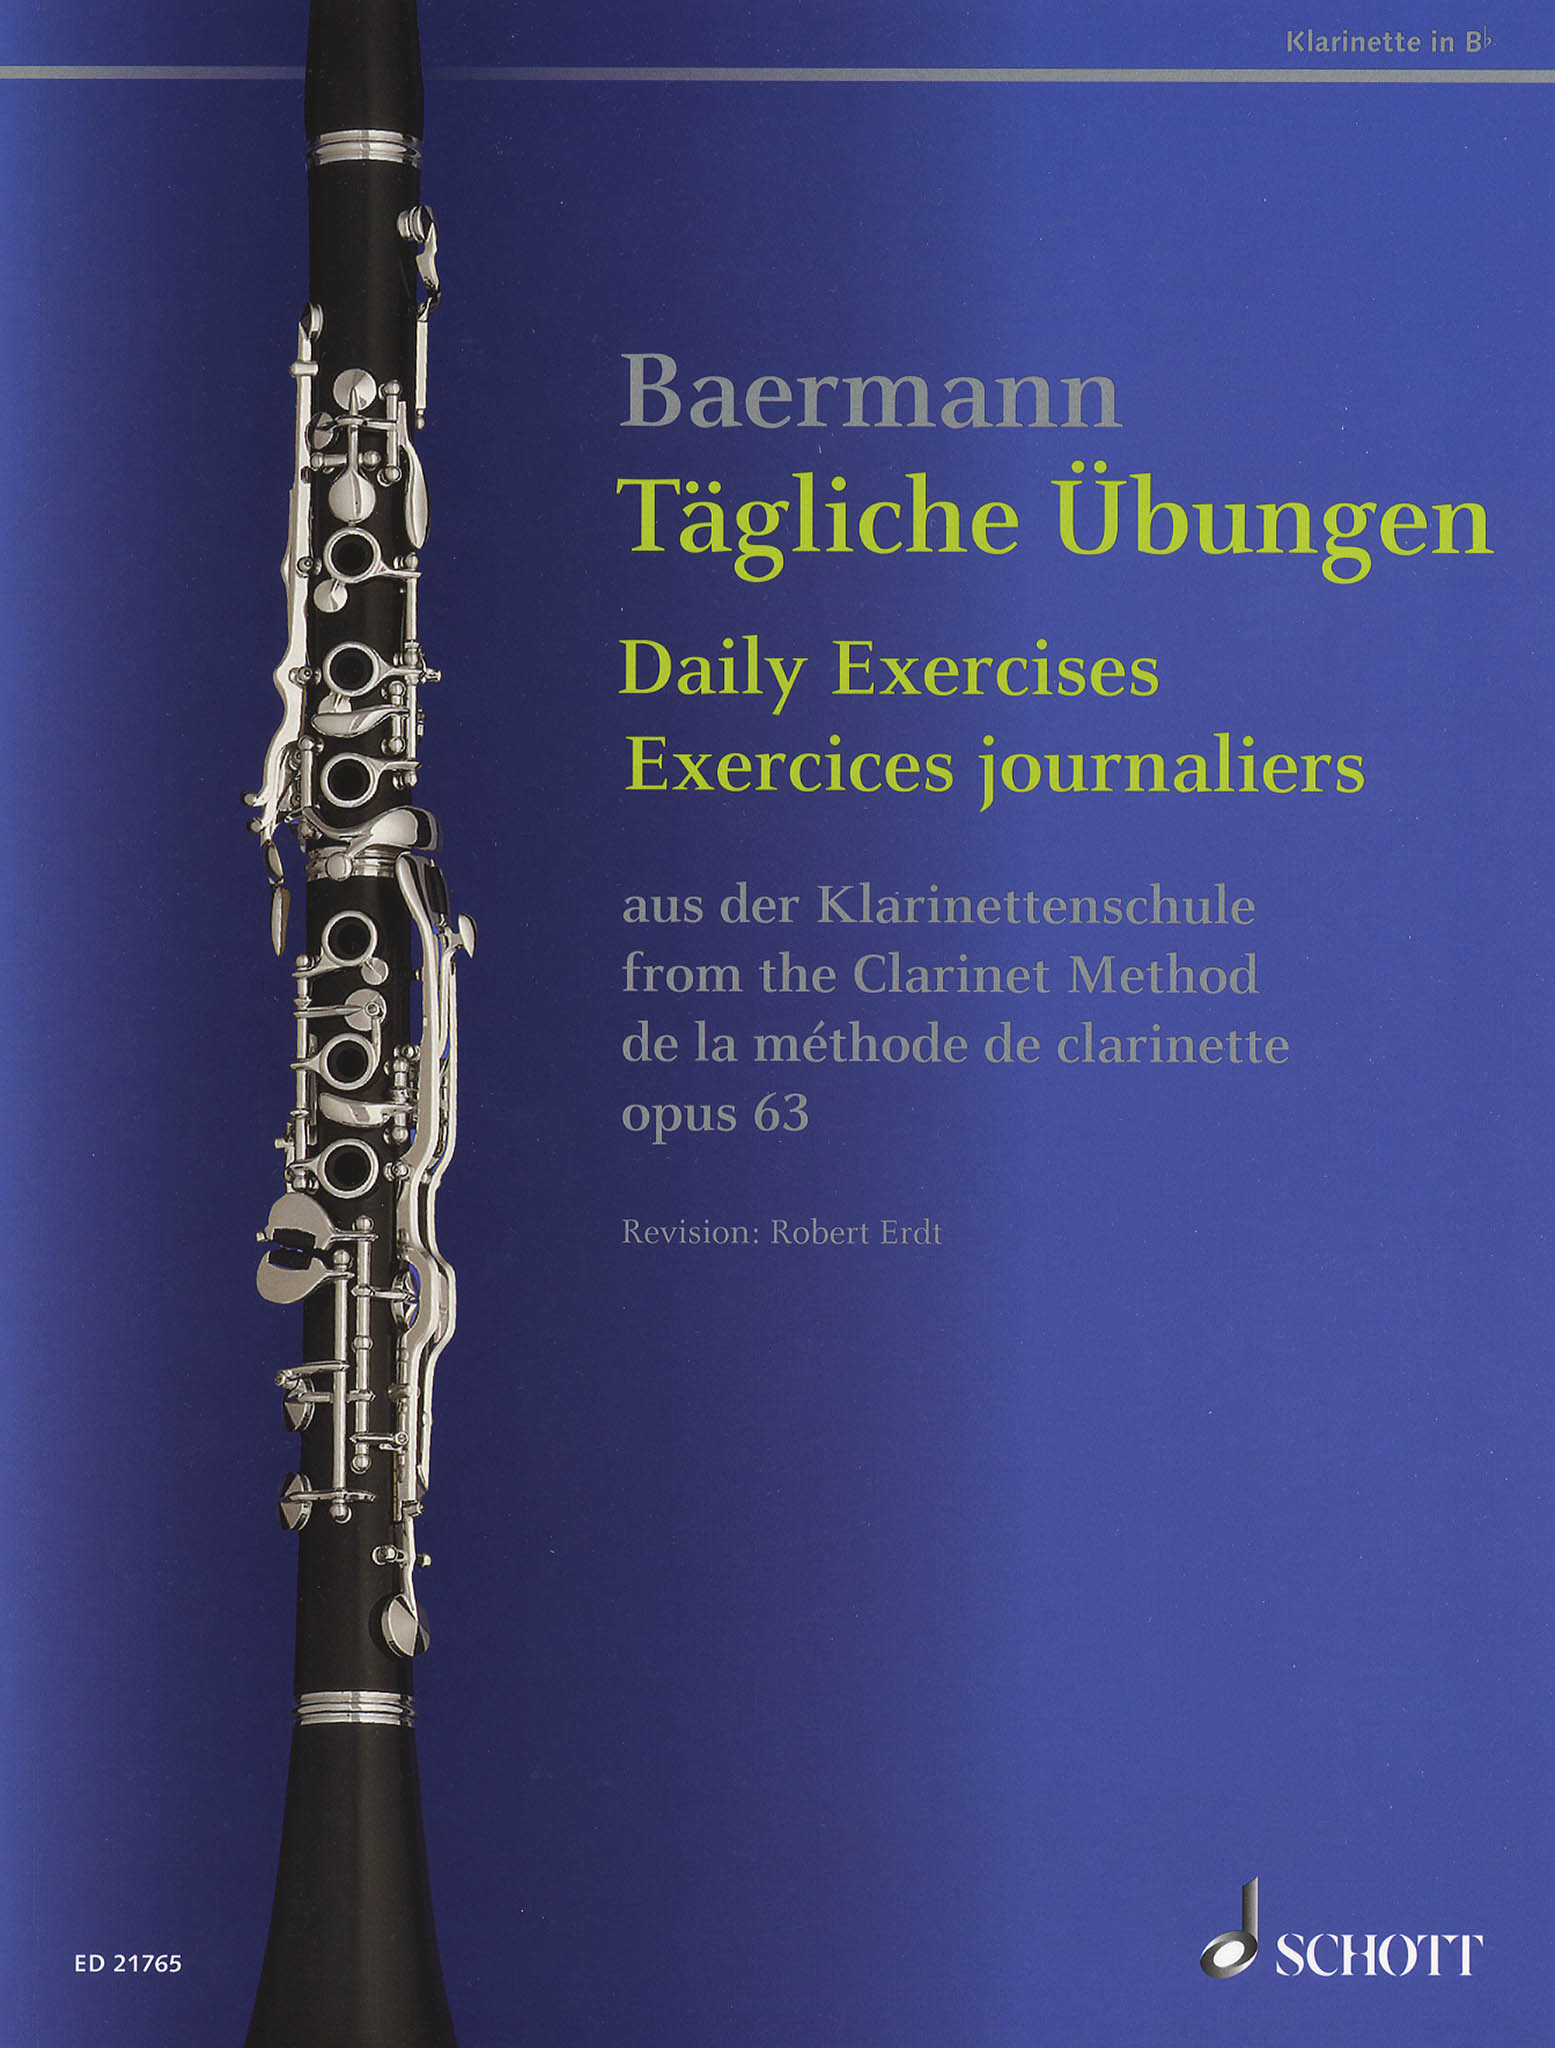 Daily Exercises from the Clarinet Method, Op. 63 Cover